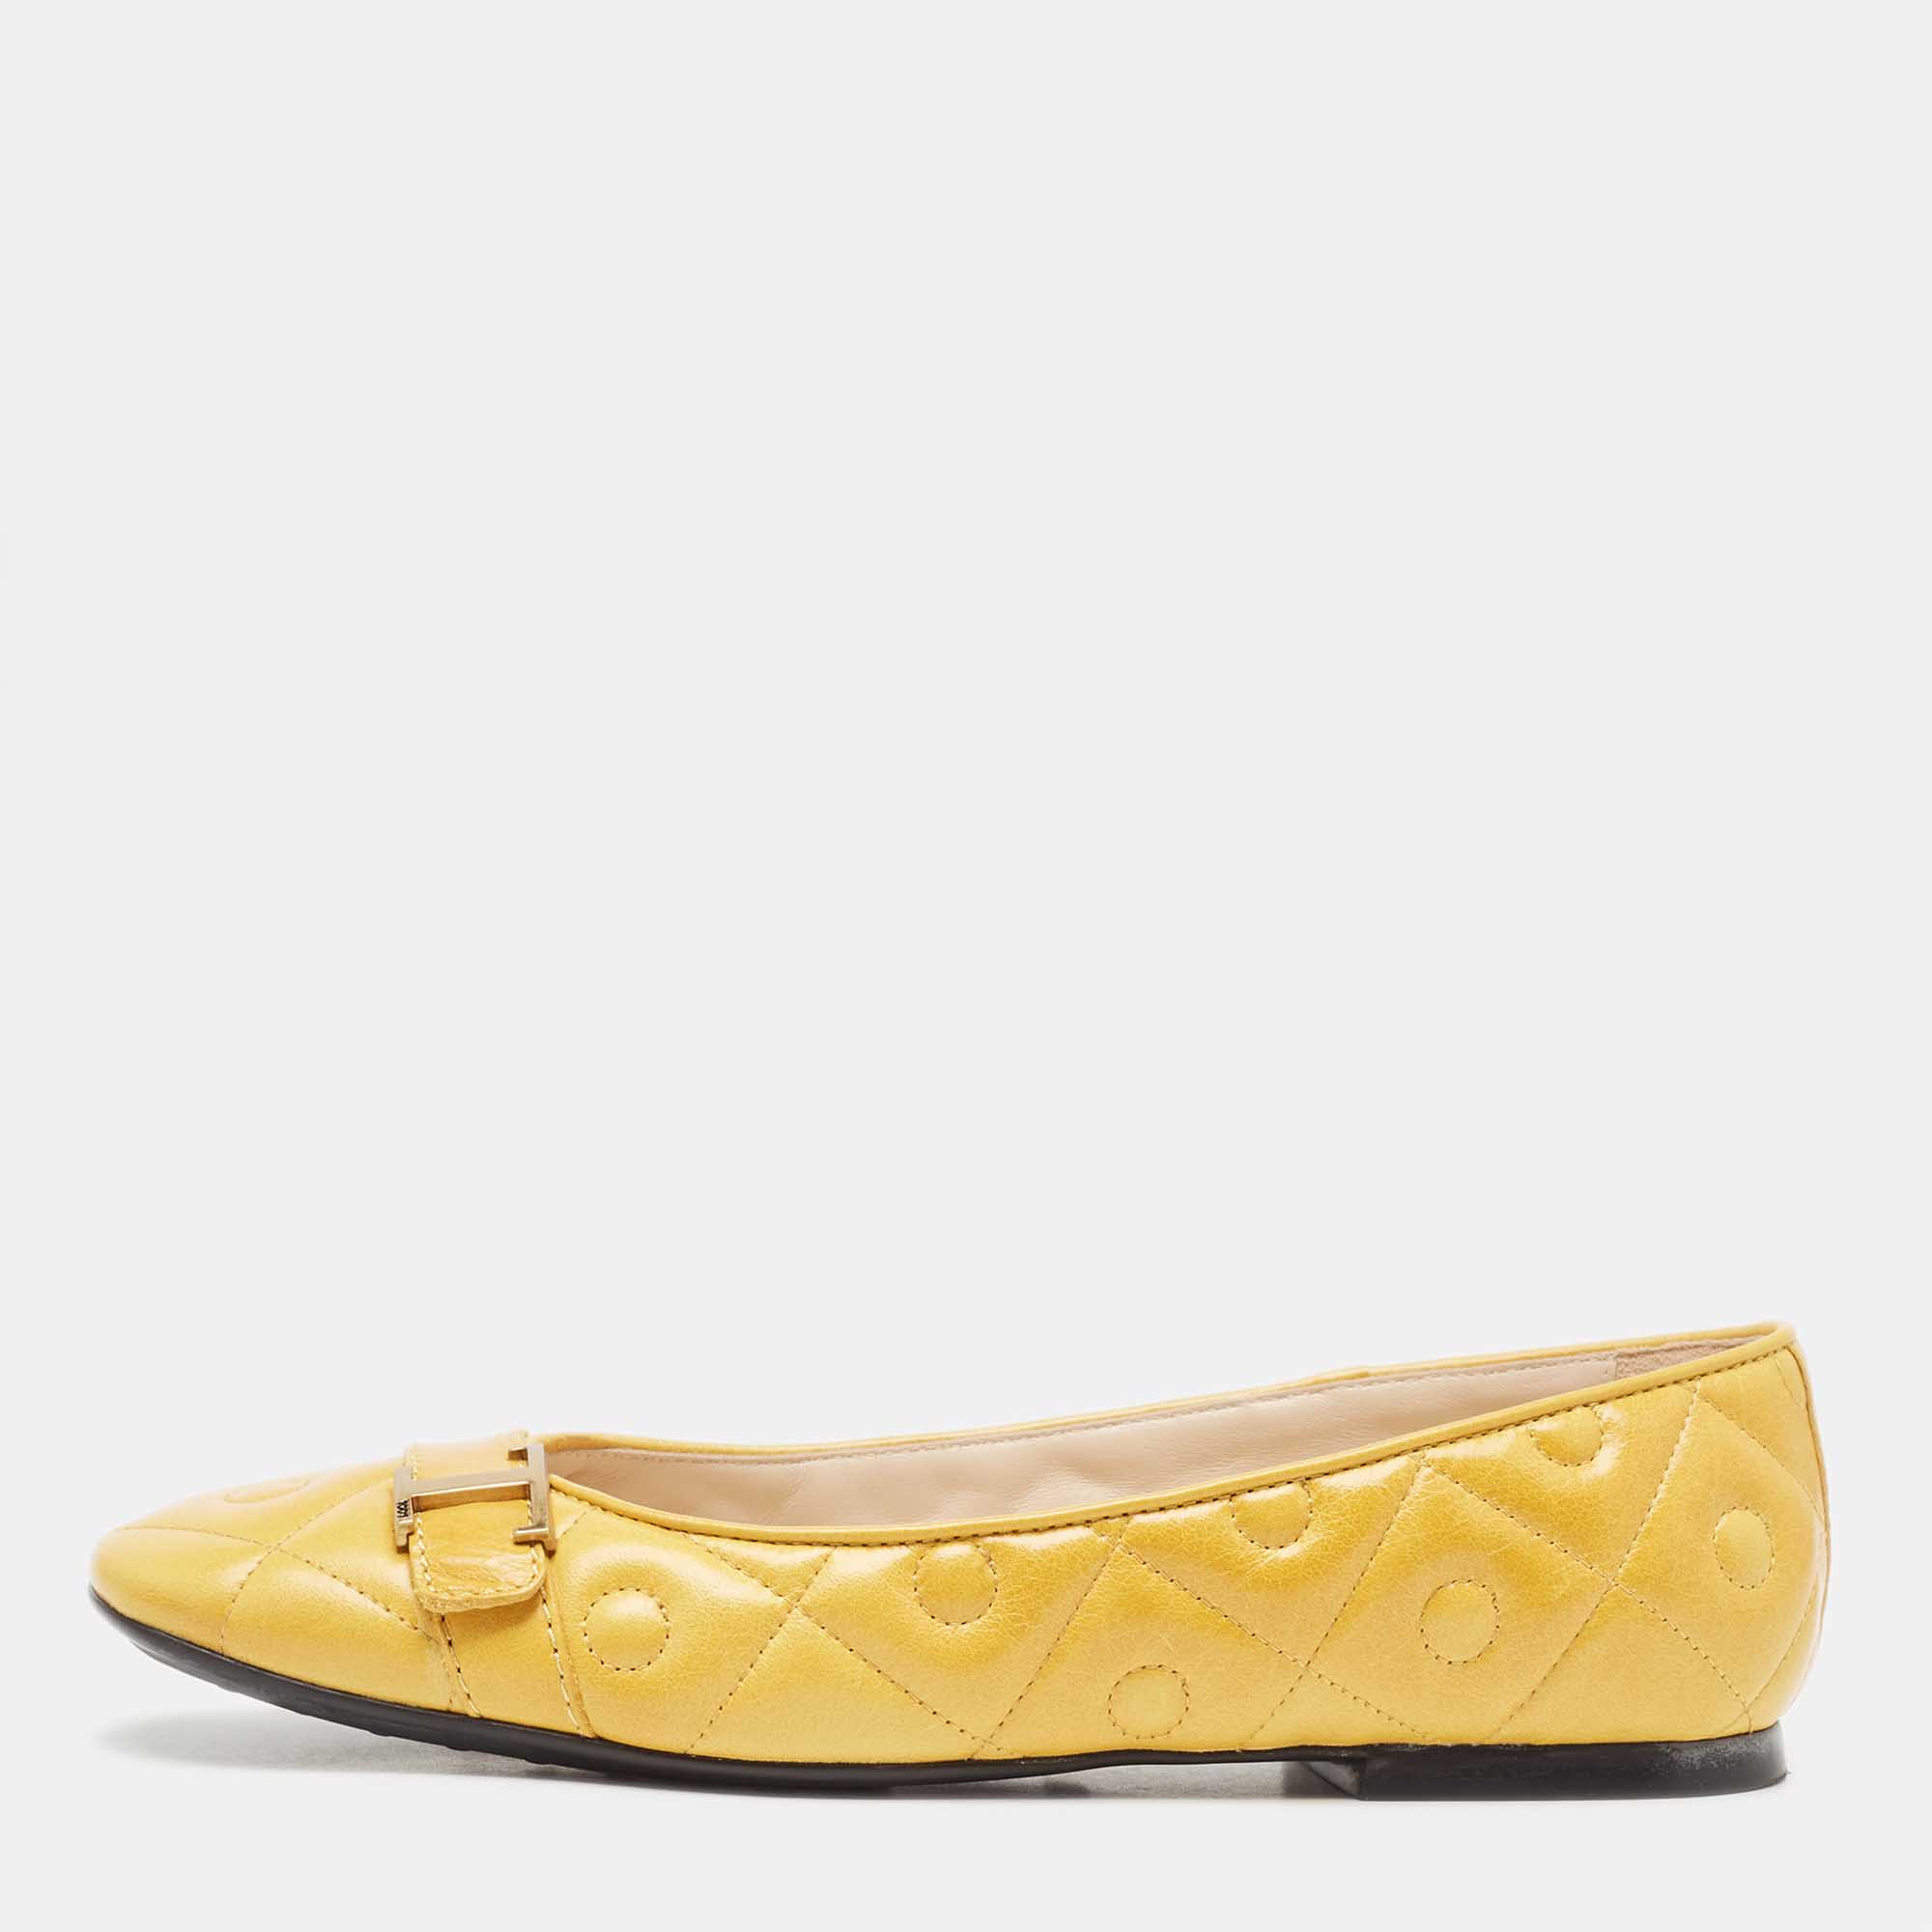 Tod's yellow quilted leather ballet flats size 39.5